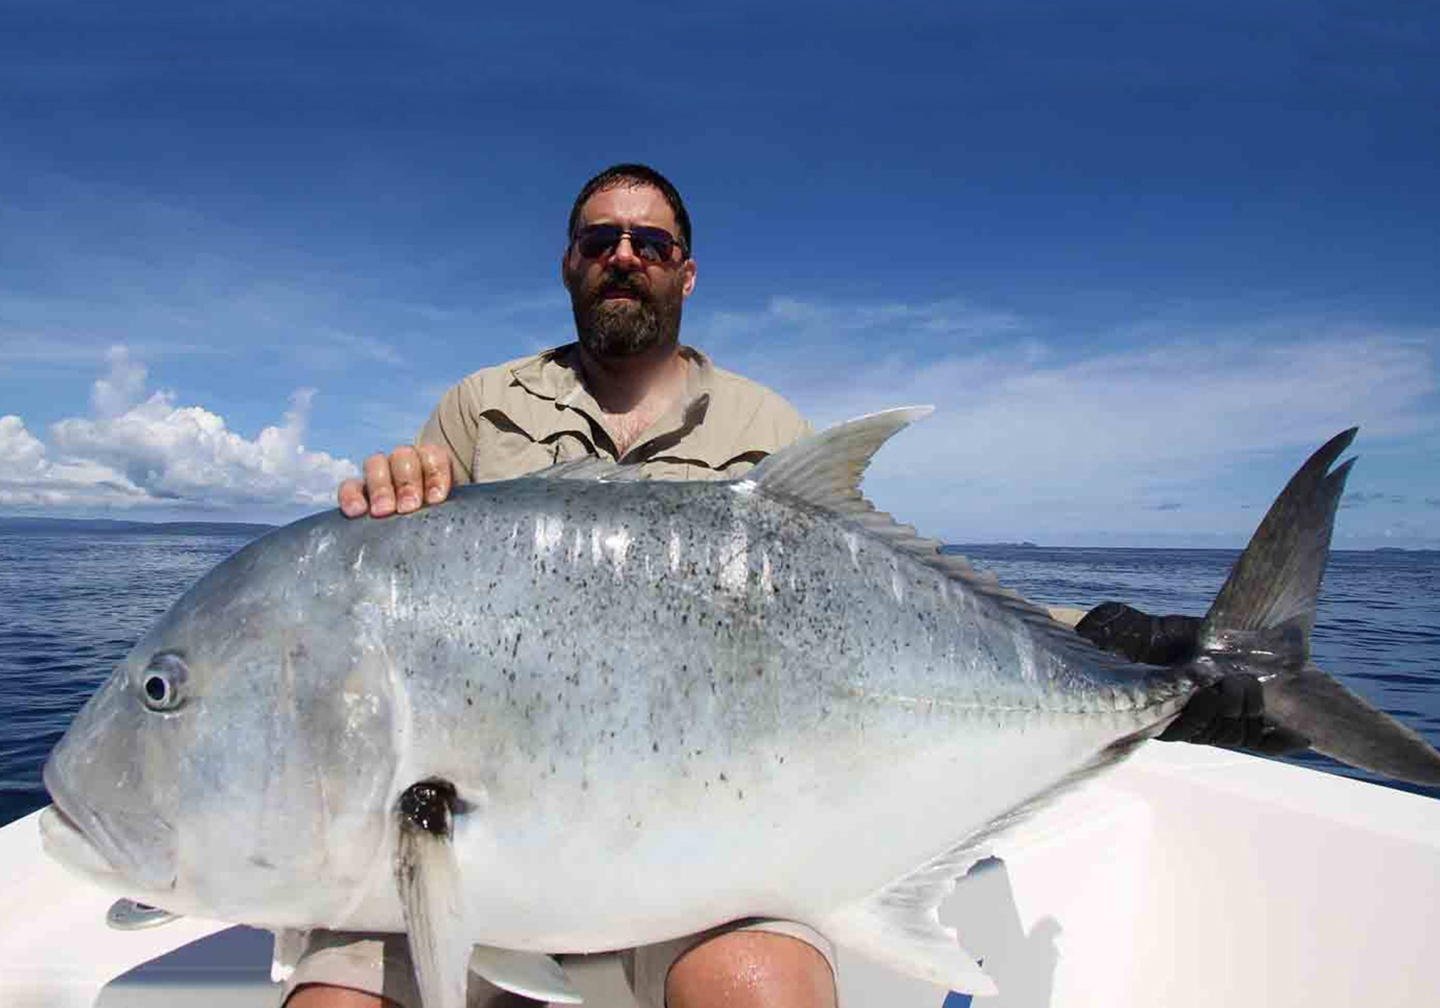 A male angler with a large Giant Trevally fish on his lap.